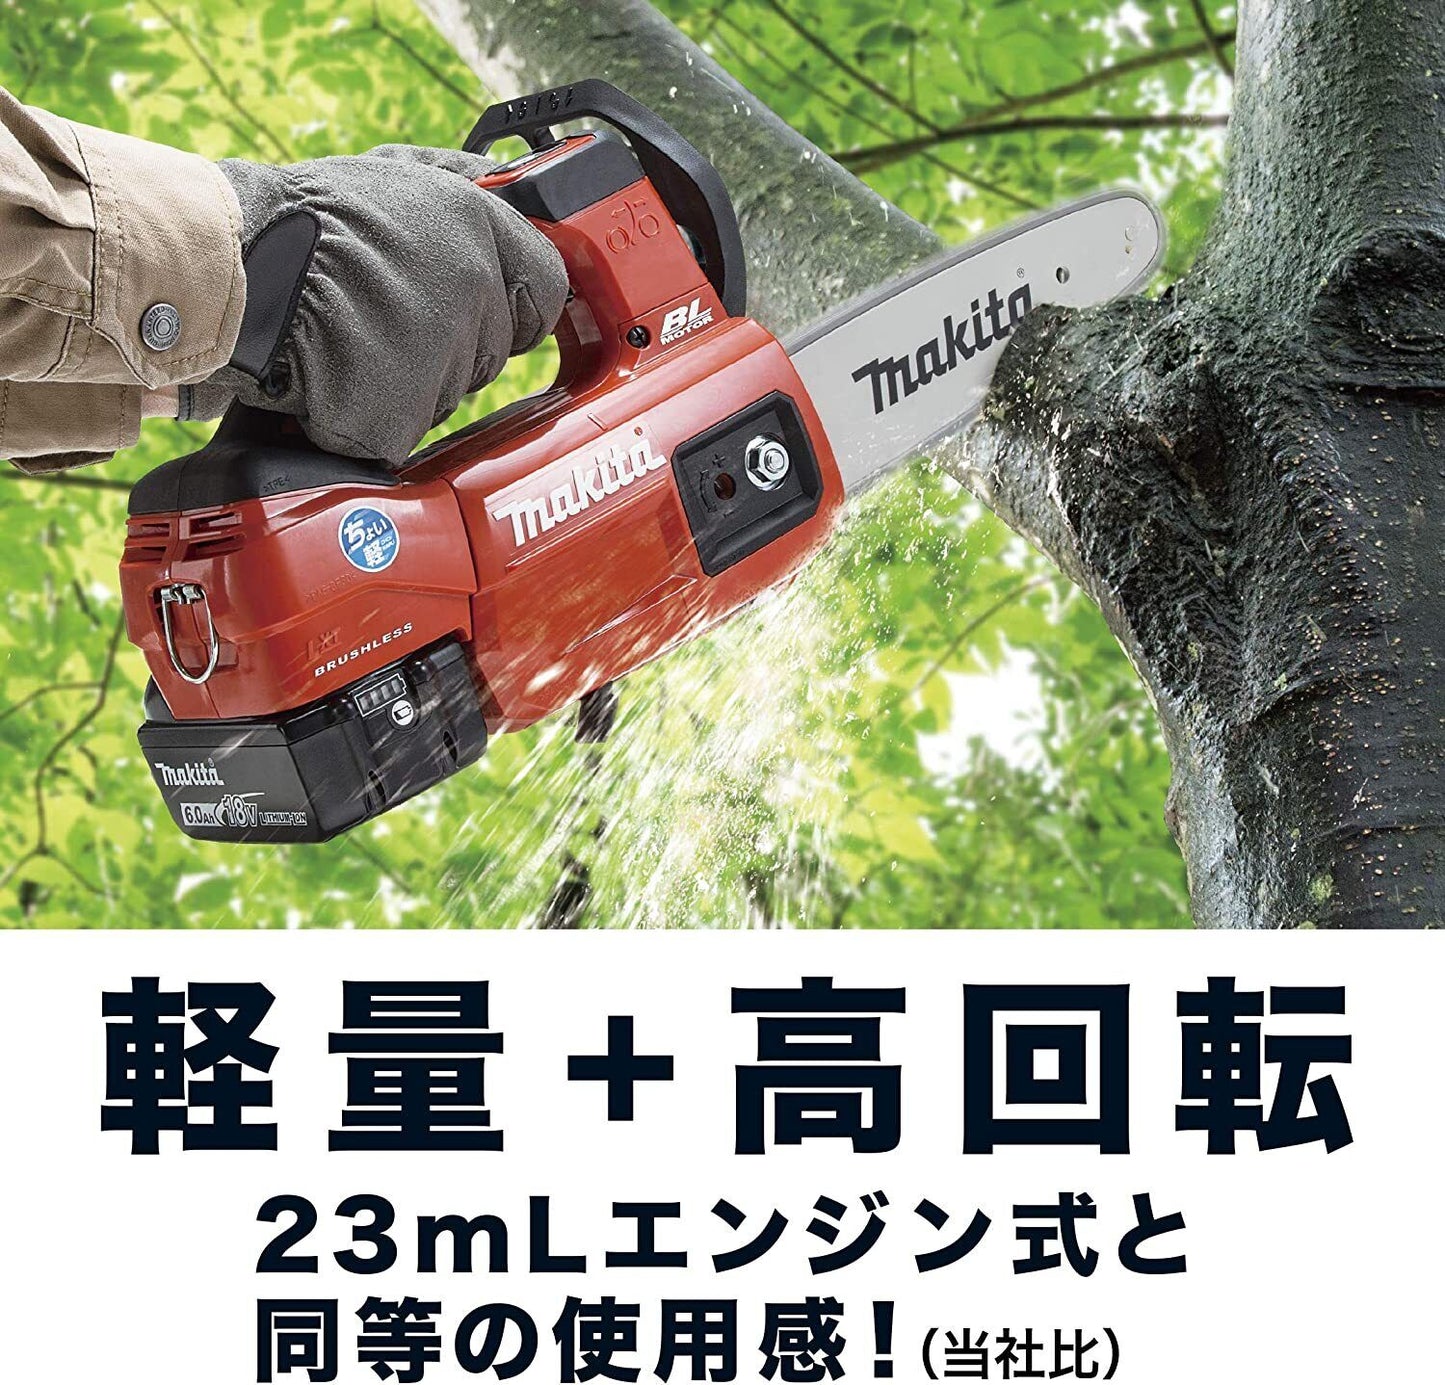 MUC204DZNR Makita 18V rechargeable chainsaw body only red Japan New